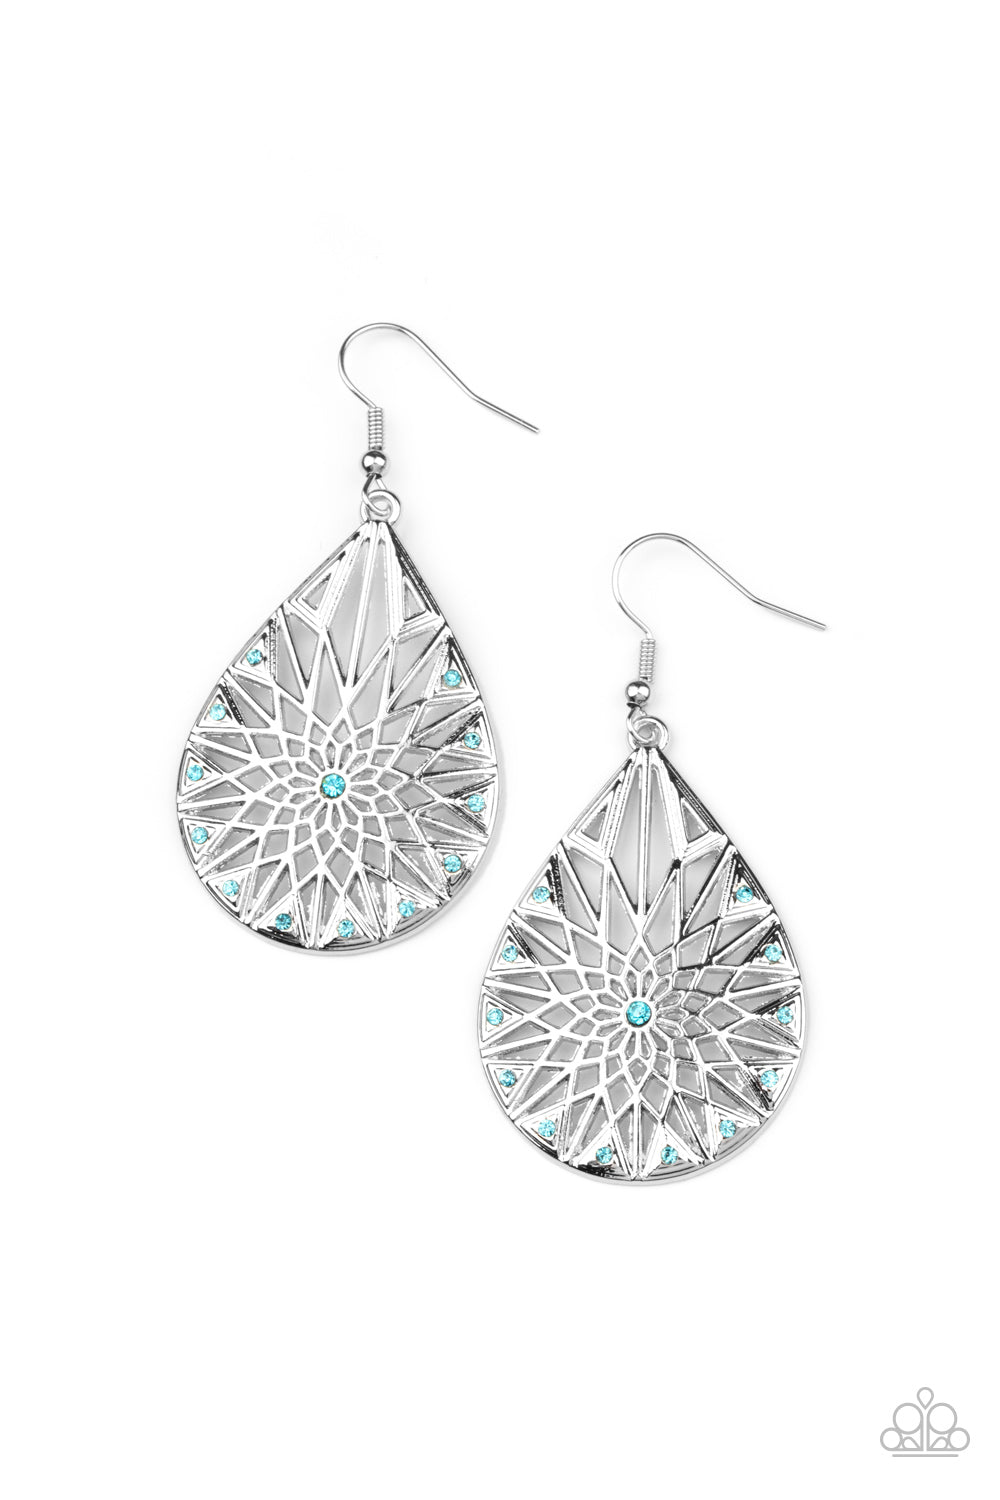 ​Icy Mosaic - Blue and Silver Teardrop Earrings - Paparazzi Accessories - Featuring a shattered snowflake pattern, the front of an airy silver teardrop is adorned in dainty blue rhinestones for an icy finish. Earring attaches to a standard fishhook fitting. Sold as one pair of earrings.